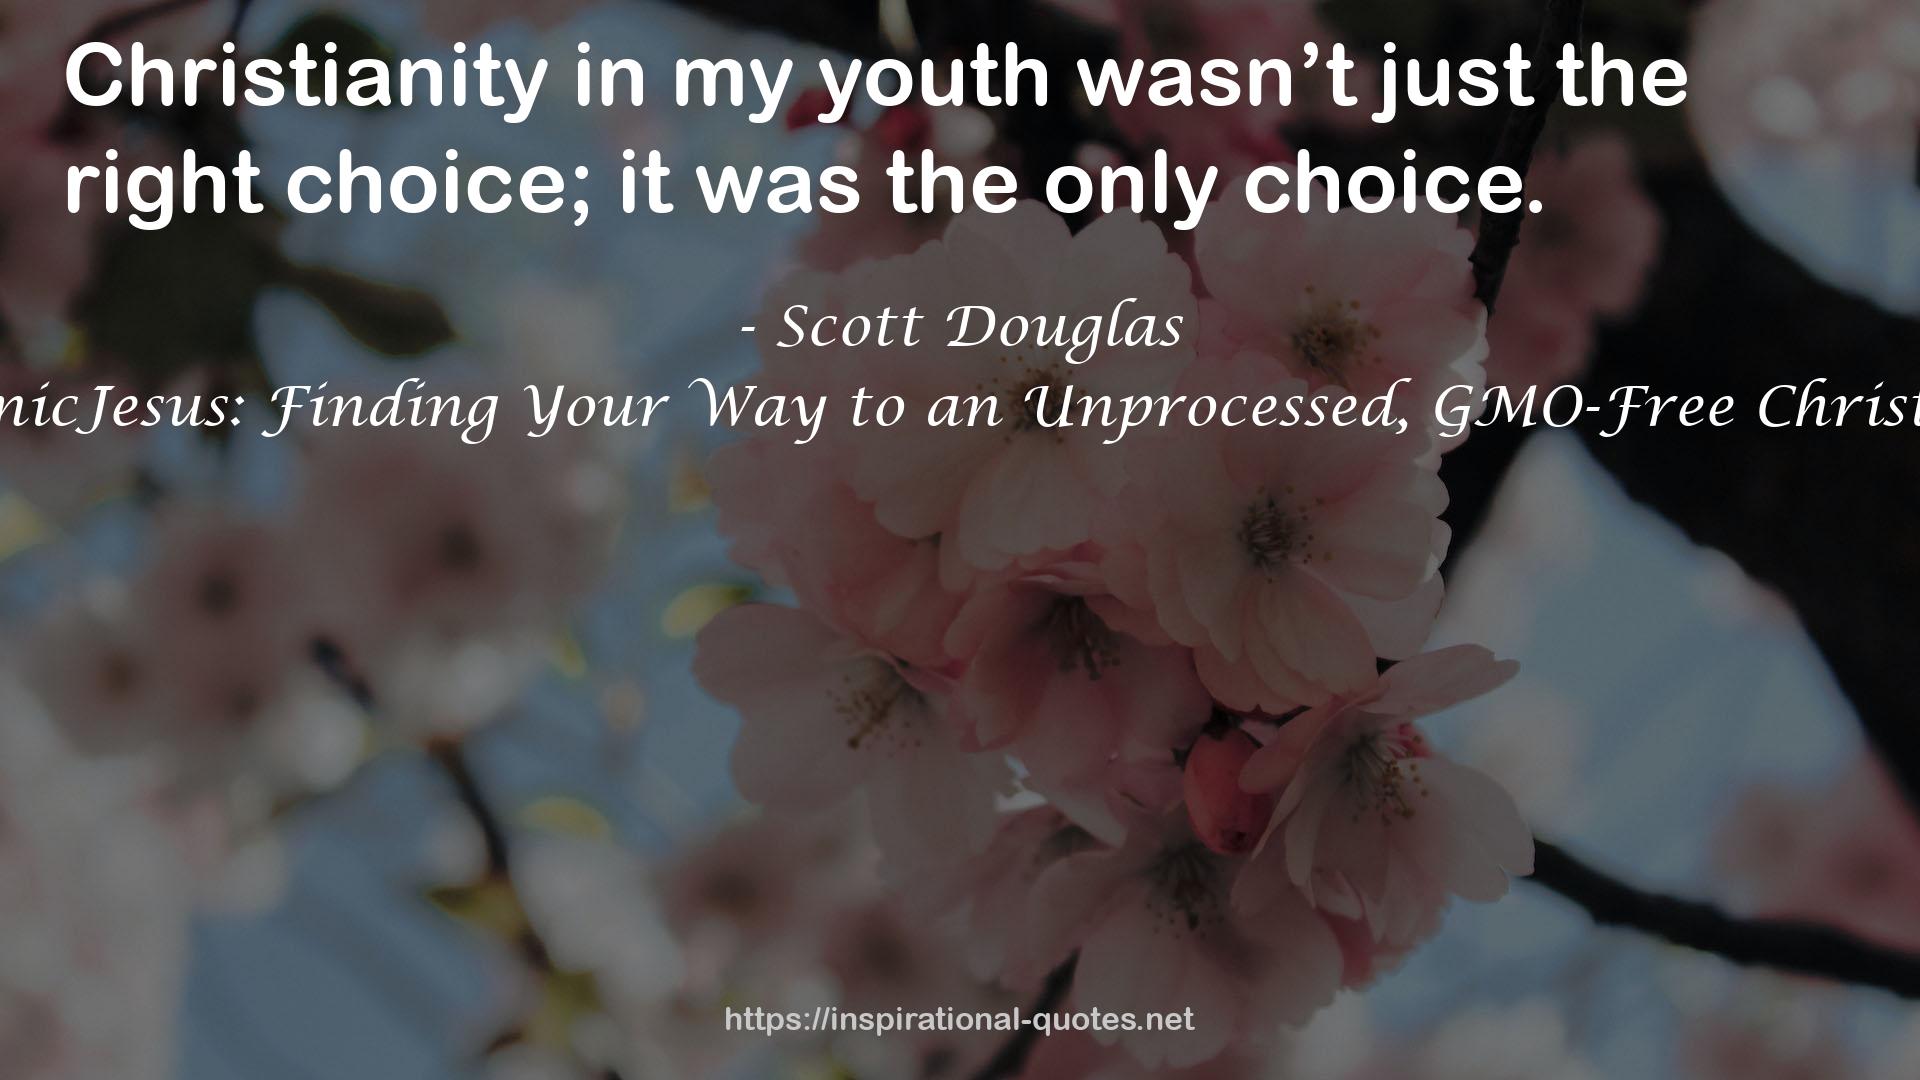 #OrganicJesus: Finding Your Way to an Unprocessed, GMO-Free Christianity QUOTES